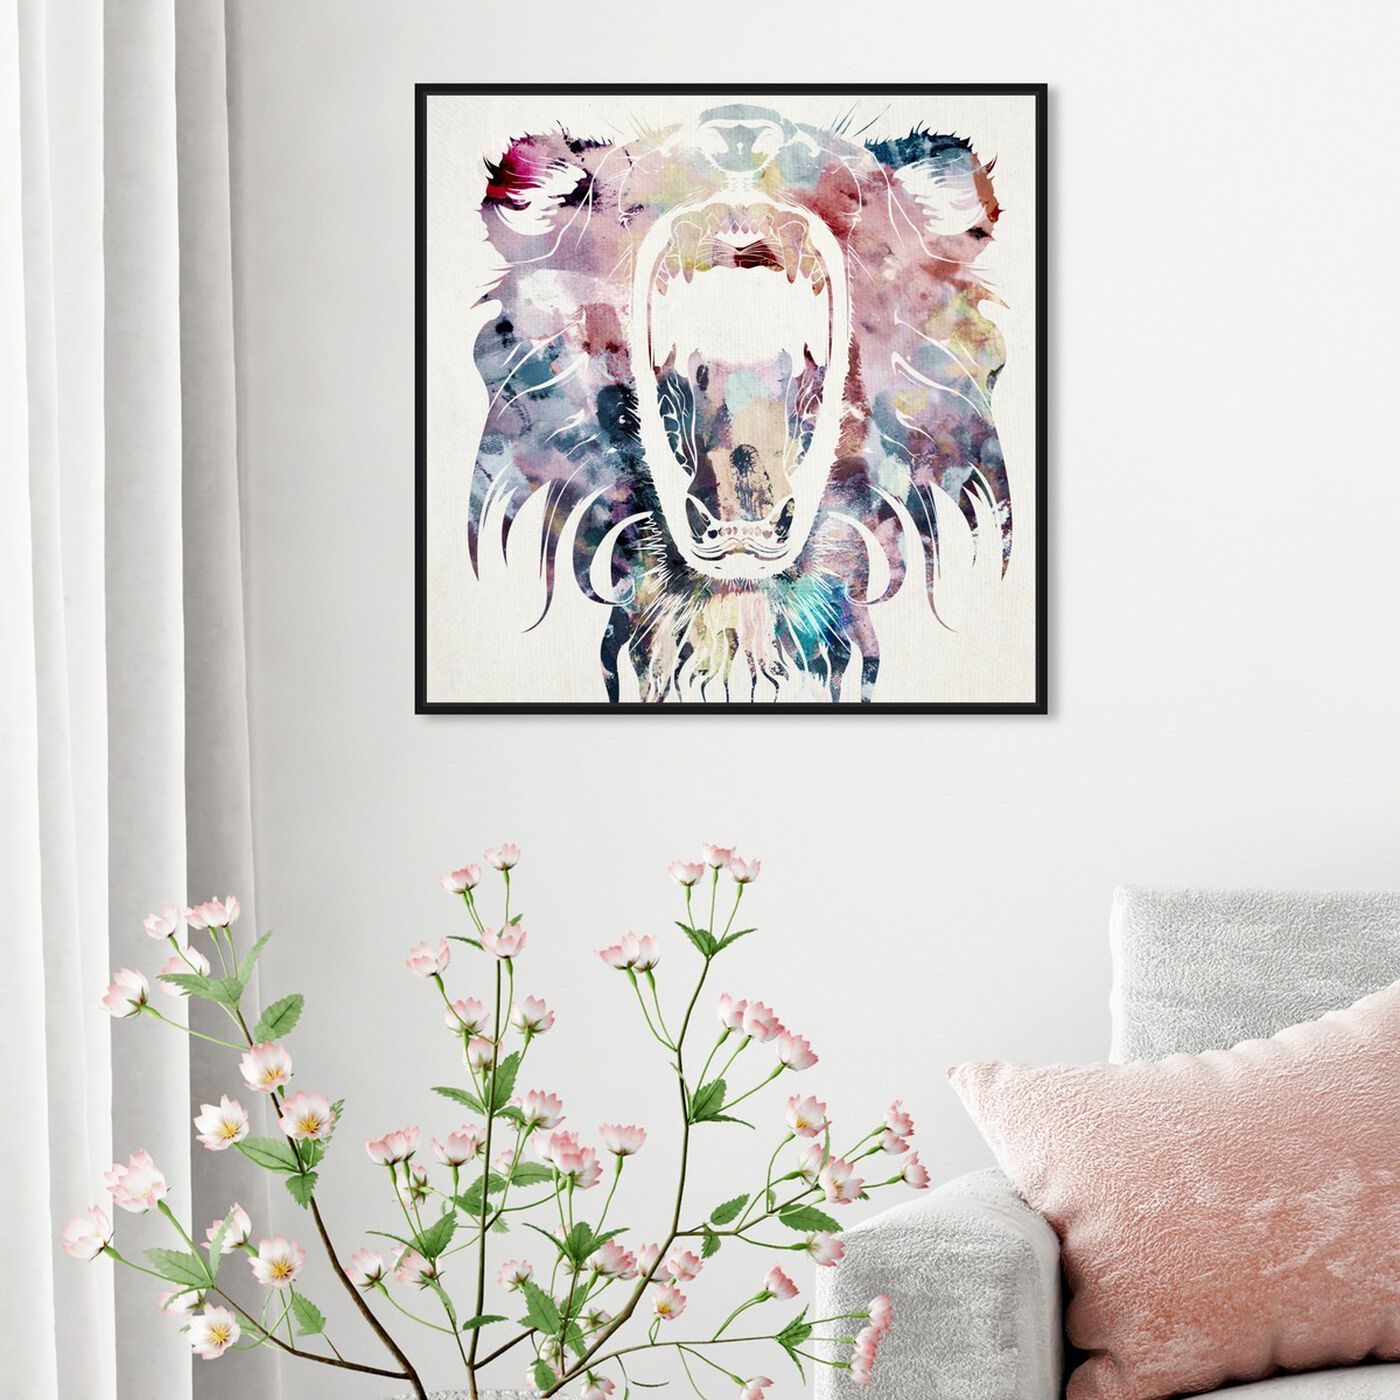 Hanging view of Wild Child featuring animals and felines art.